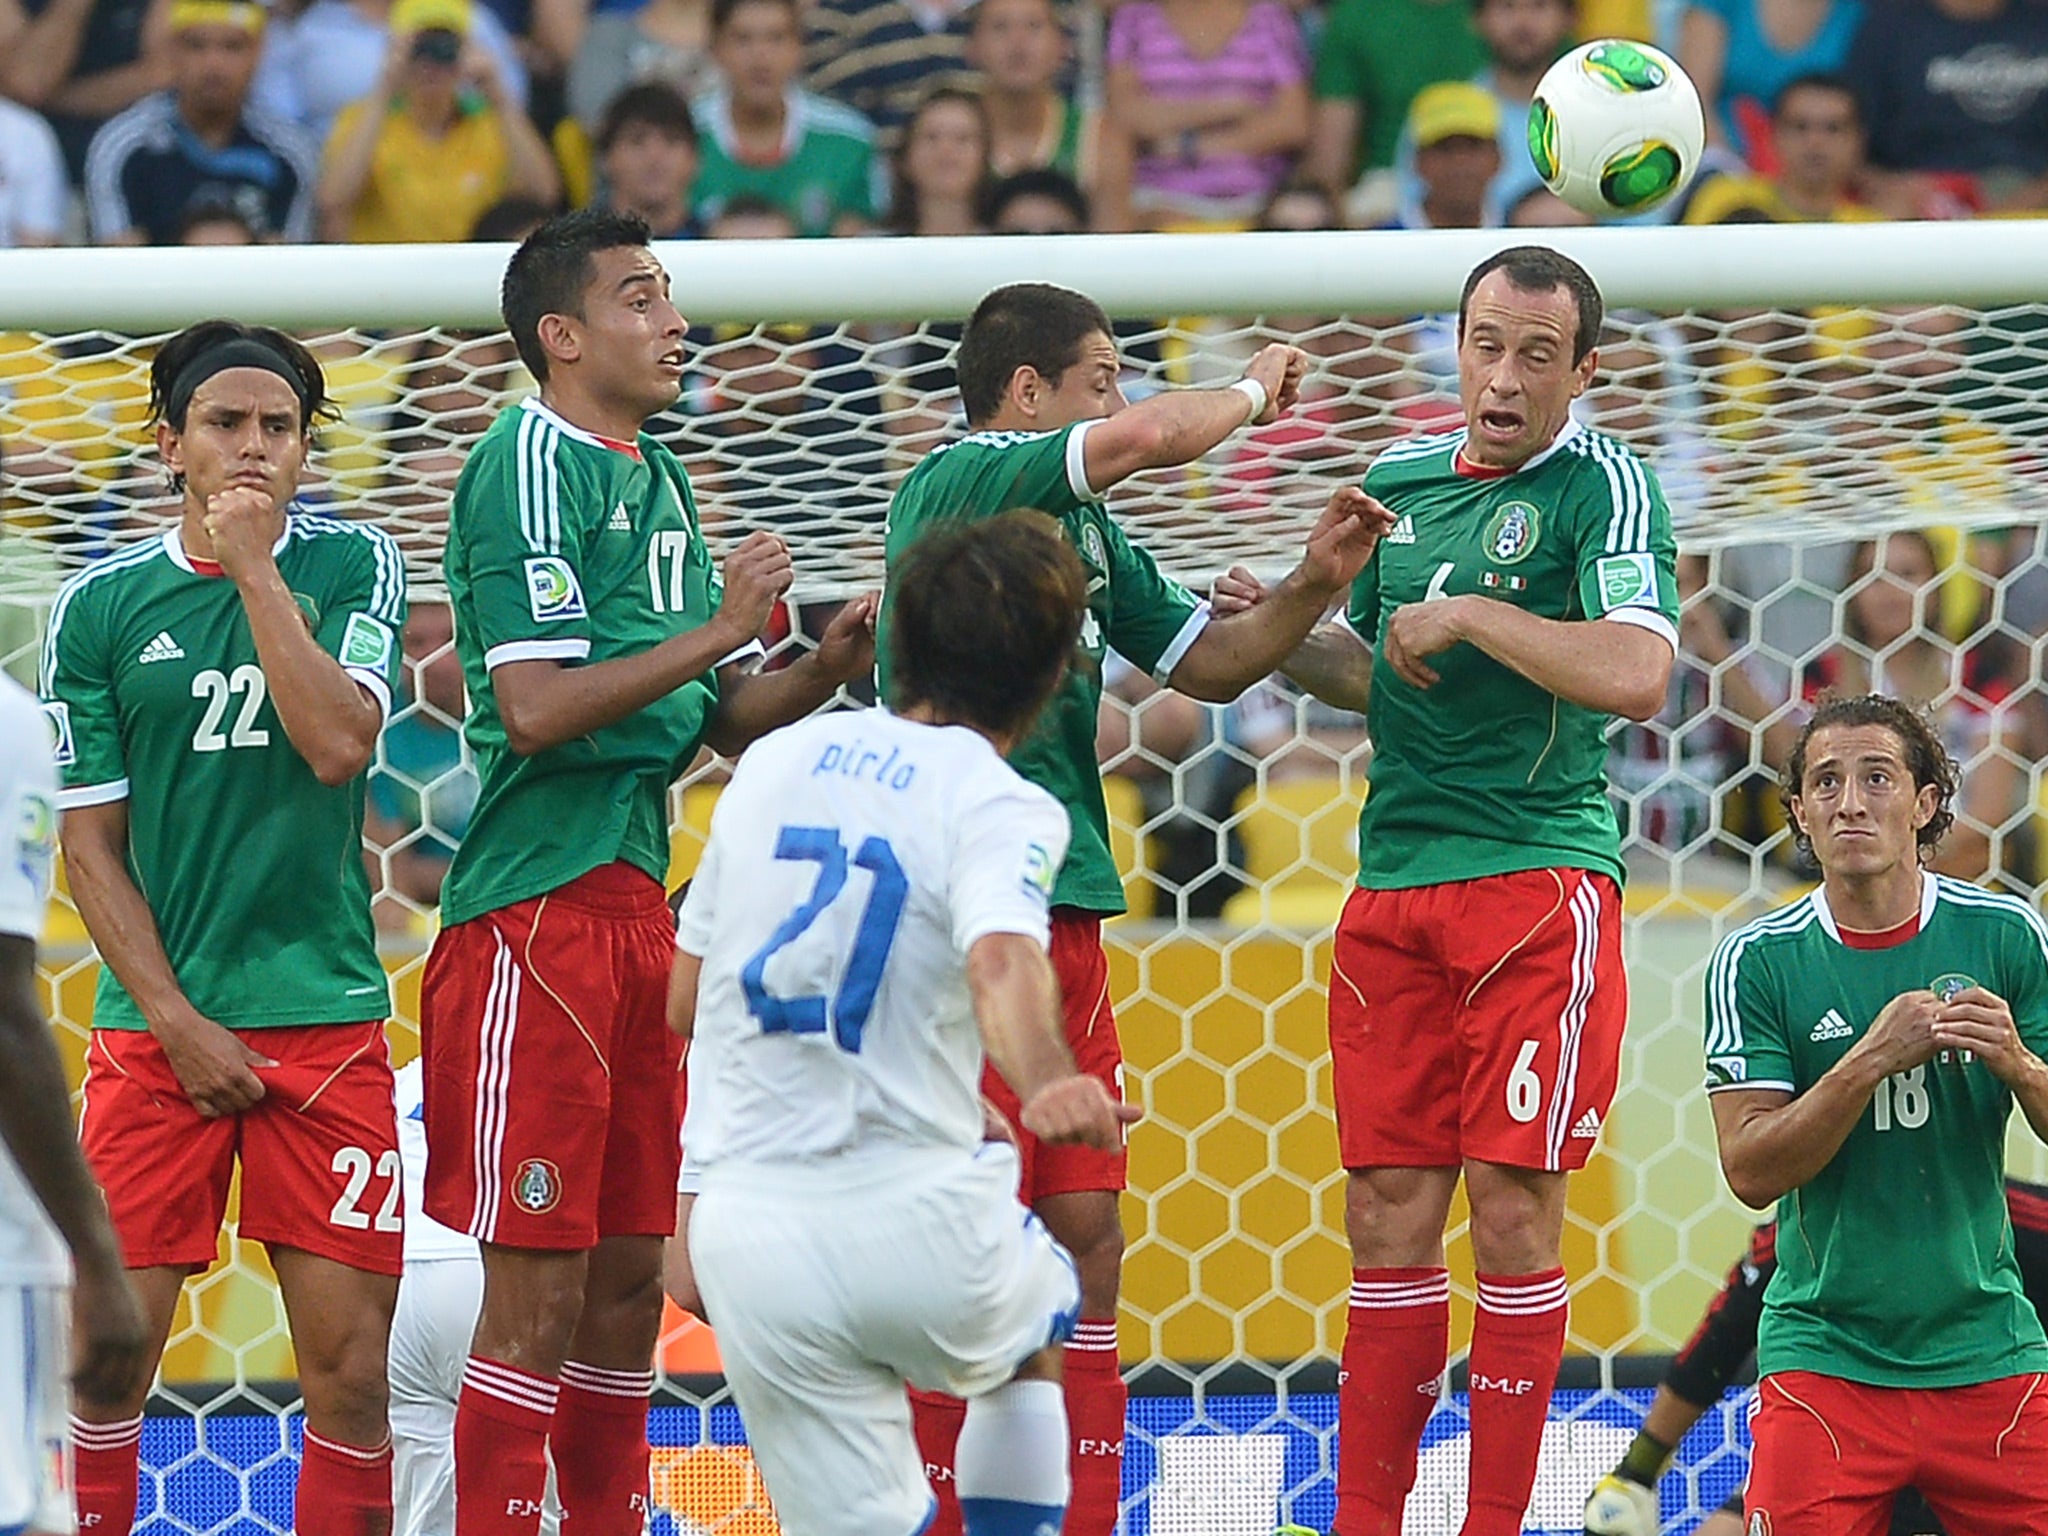 Italy's midfielder Andrea Pirlo (21) takes a free kick to score against Mexico during their FIFA Confederations Cup Brazil 2013 Group A football matc